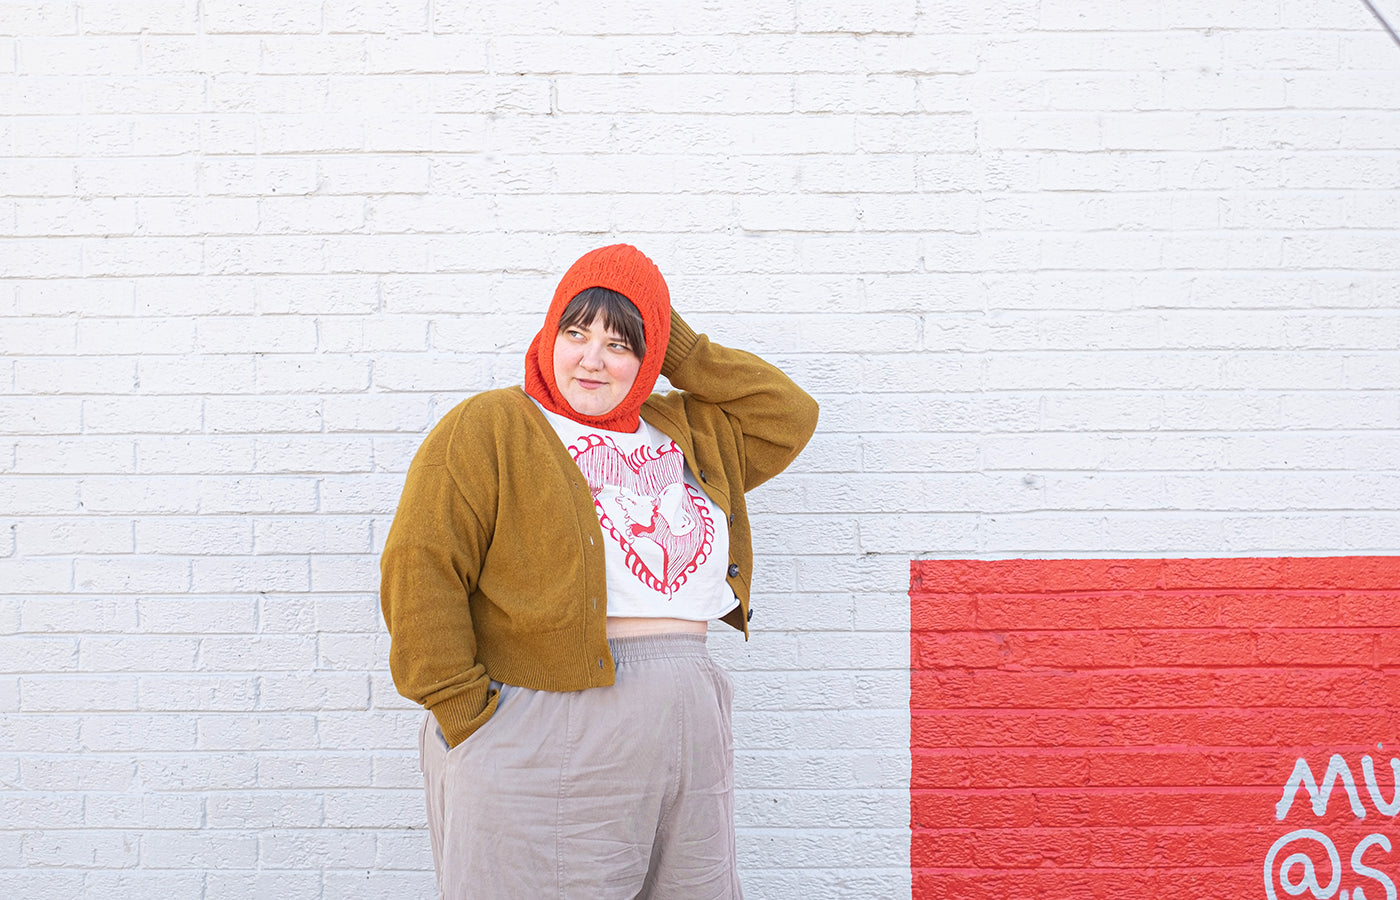 Marta wearing a red balaclava in front of a grey wall with an accent square that is also red